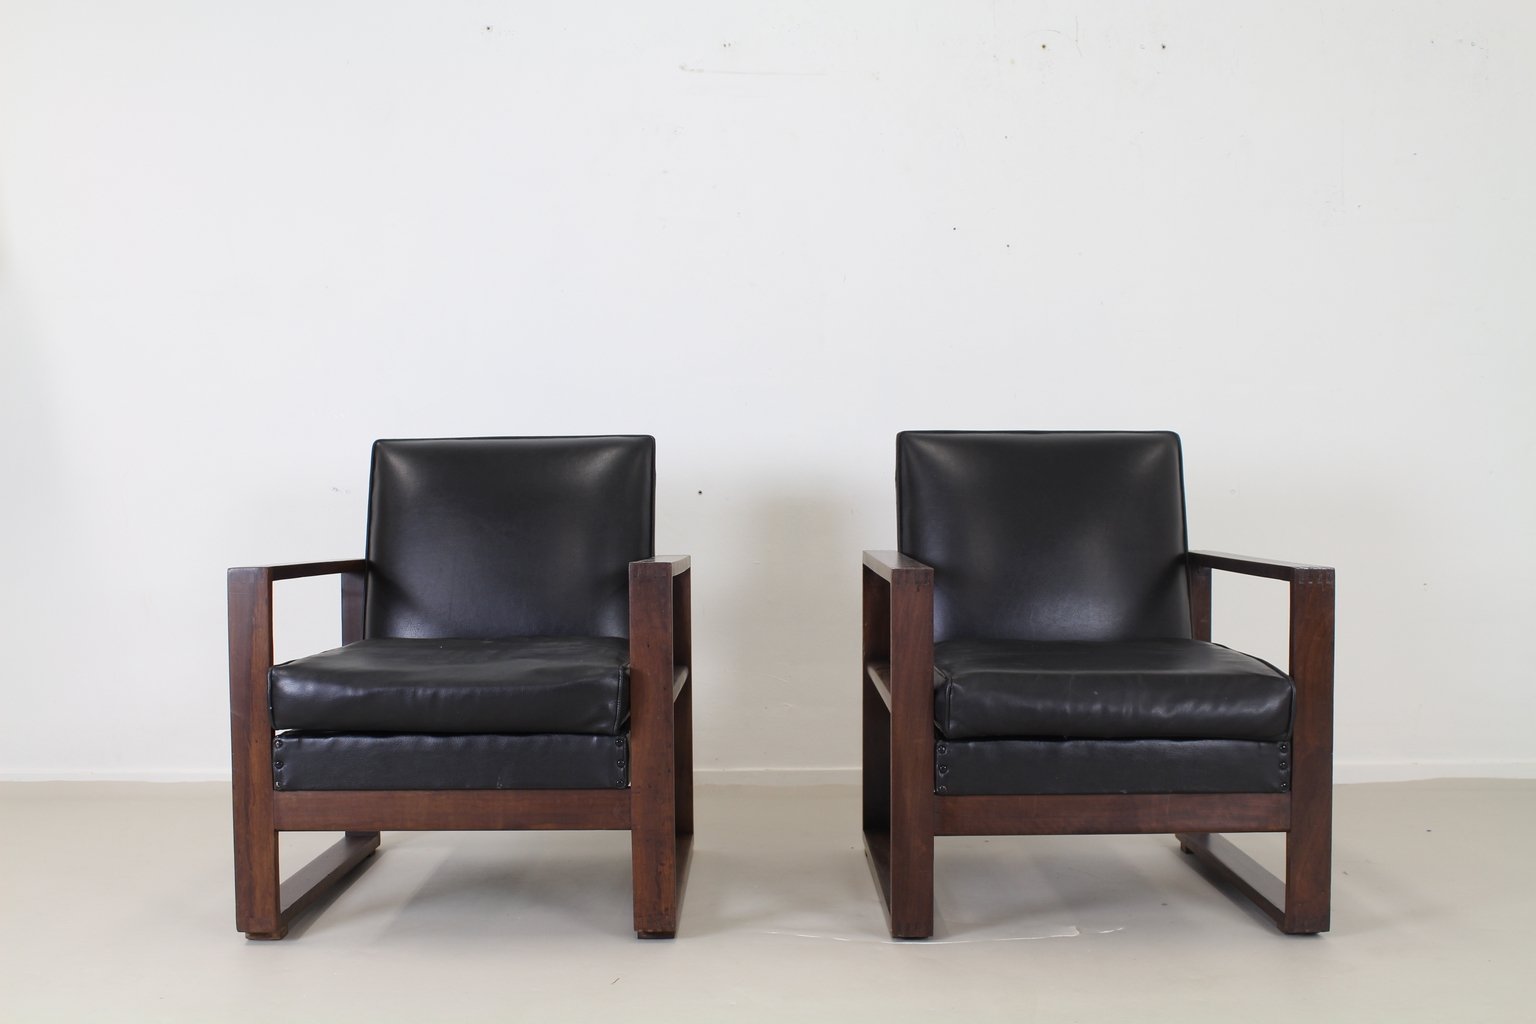 Vintage South African Lounge Chairs, 1965, Set of 2 for sale at Pamono